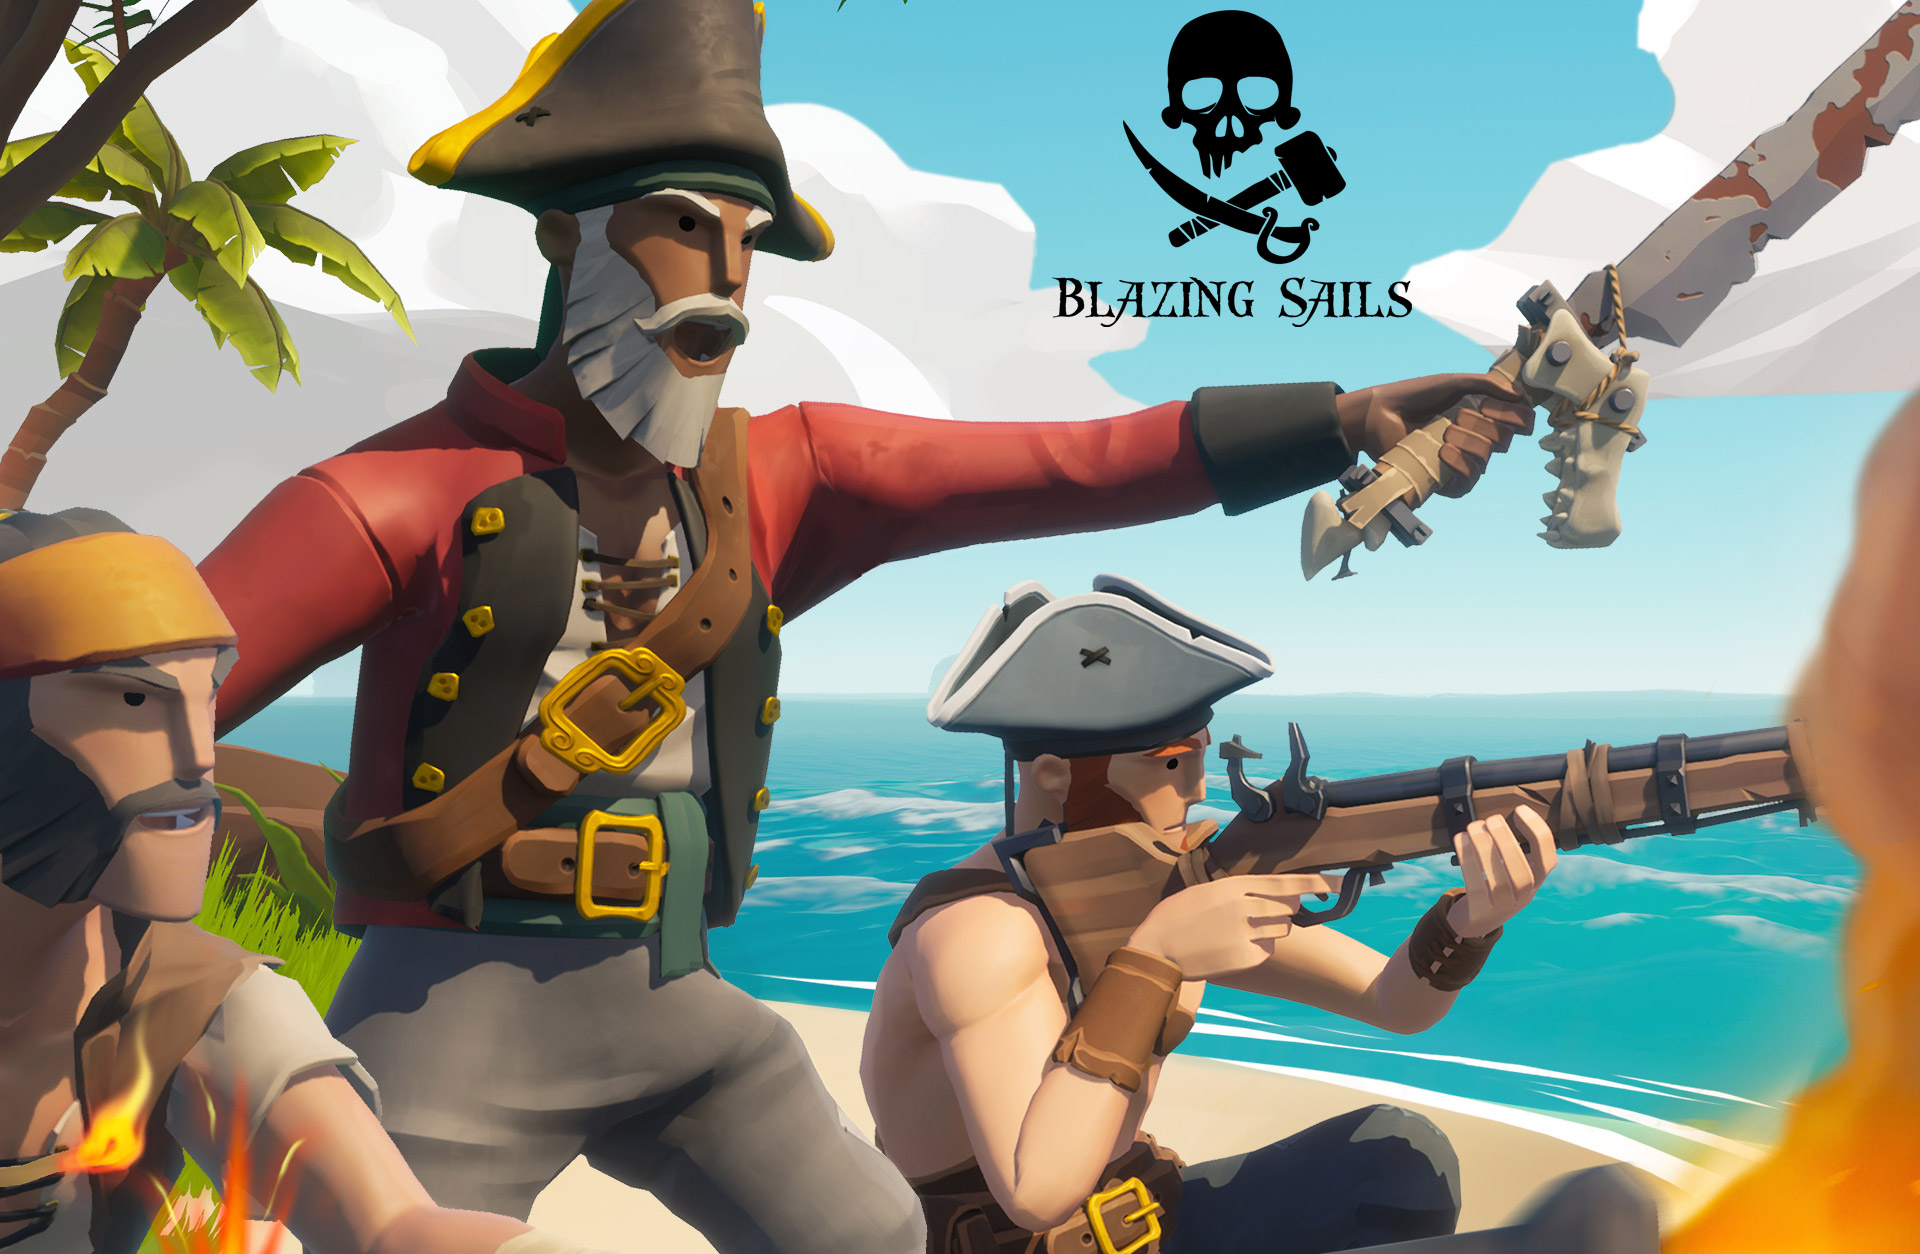 Blazing Sails: Pirate Battle Royale 2020. Blazing Sails Sea of Thieves. Sea of Thieves ps4 цена. Sea of thieves ps4